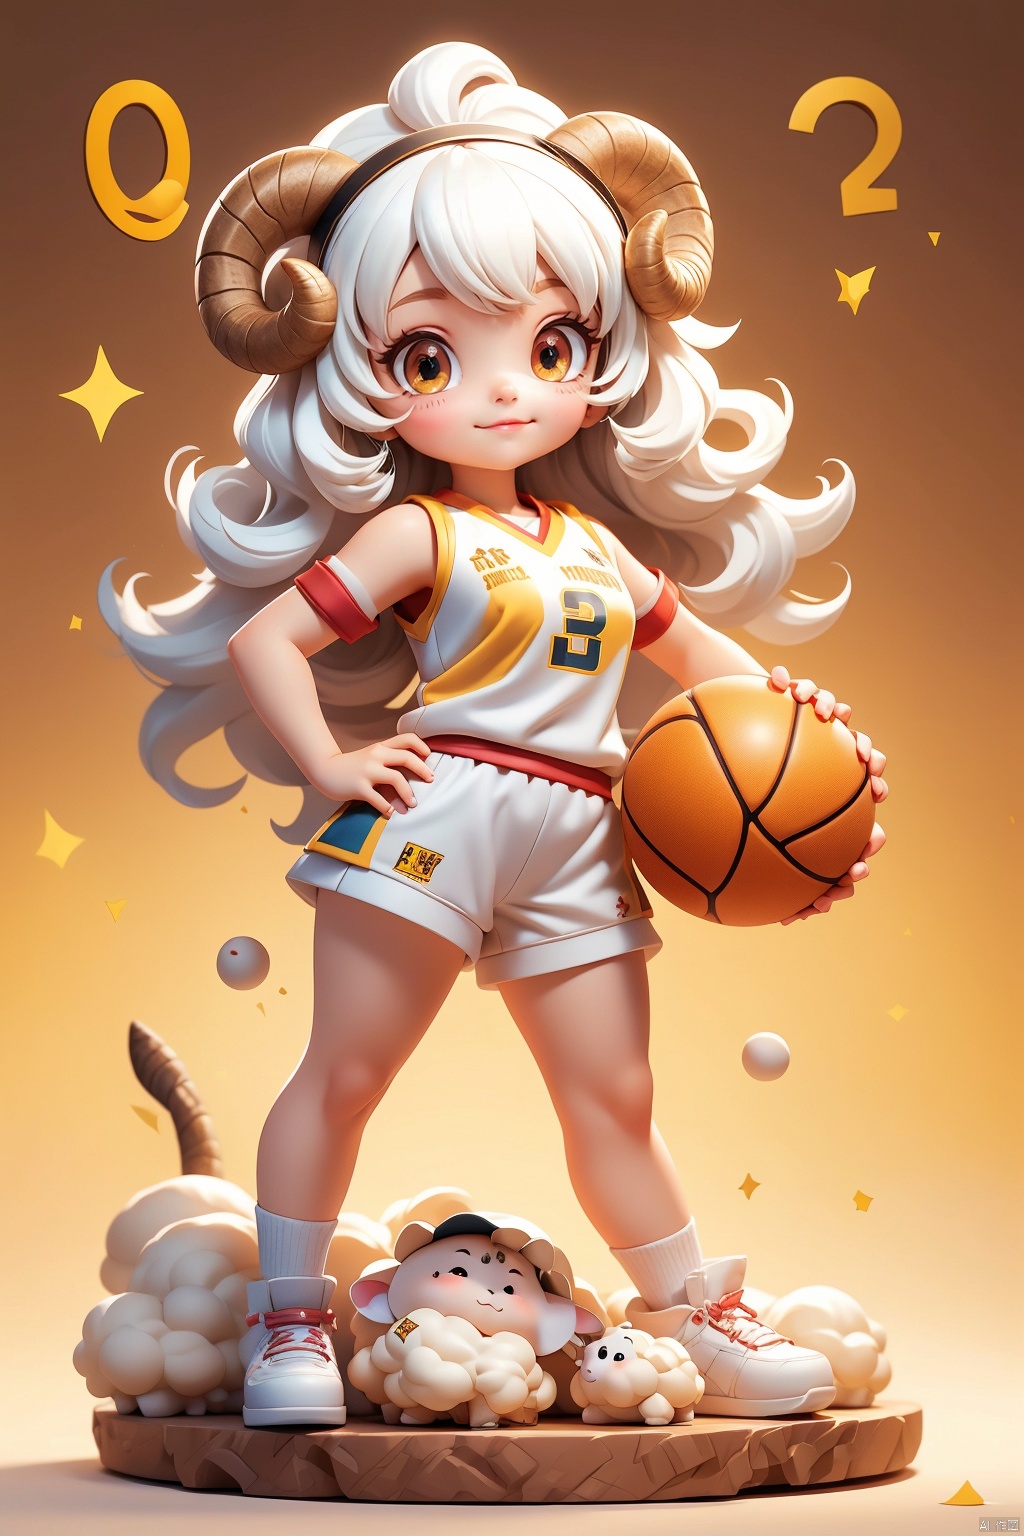 1 girl, white hair, sheep hair, (3 years :1.9), solo, (Q version :1.6), IP, determined expression, sheep horns, animal features, basketball uniform, blush, simple white background, hands on hips